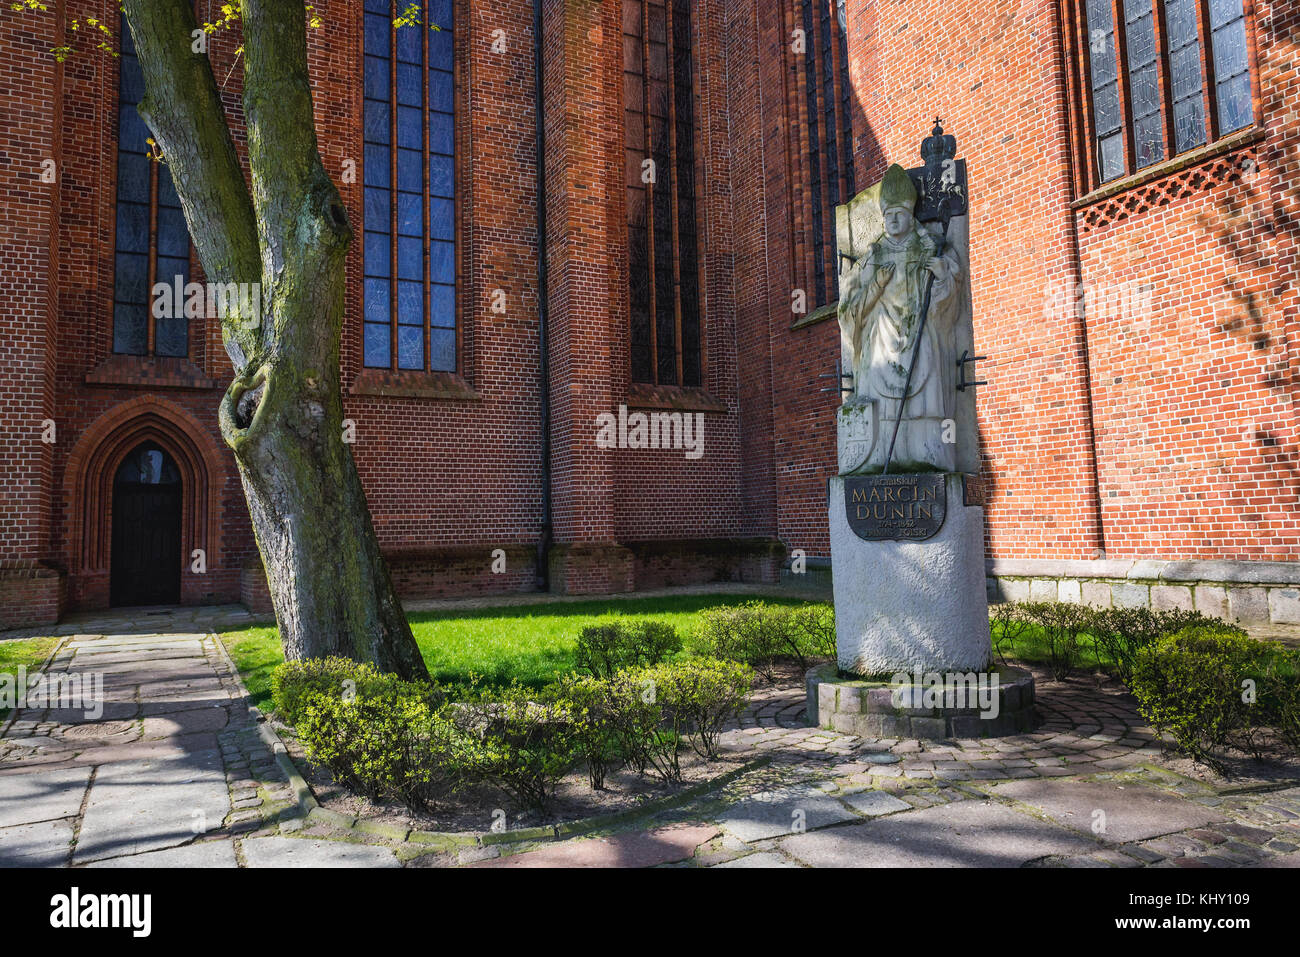 Archbishop Marcin Dunin statue in front of gothic style Co-Cathedral Basilica of the Assumption of the Blessed Virgin Mary in Kolobrzeg city, Poland Stock Photo